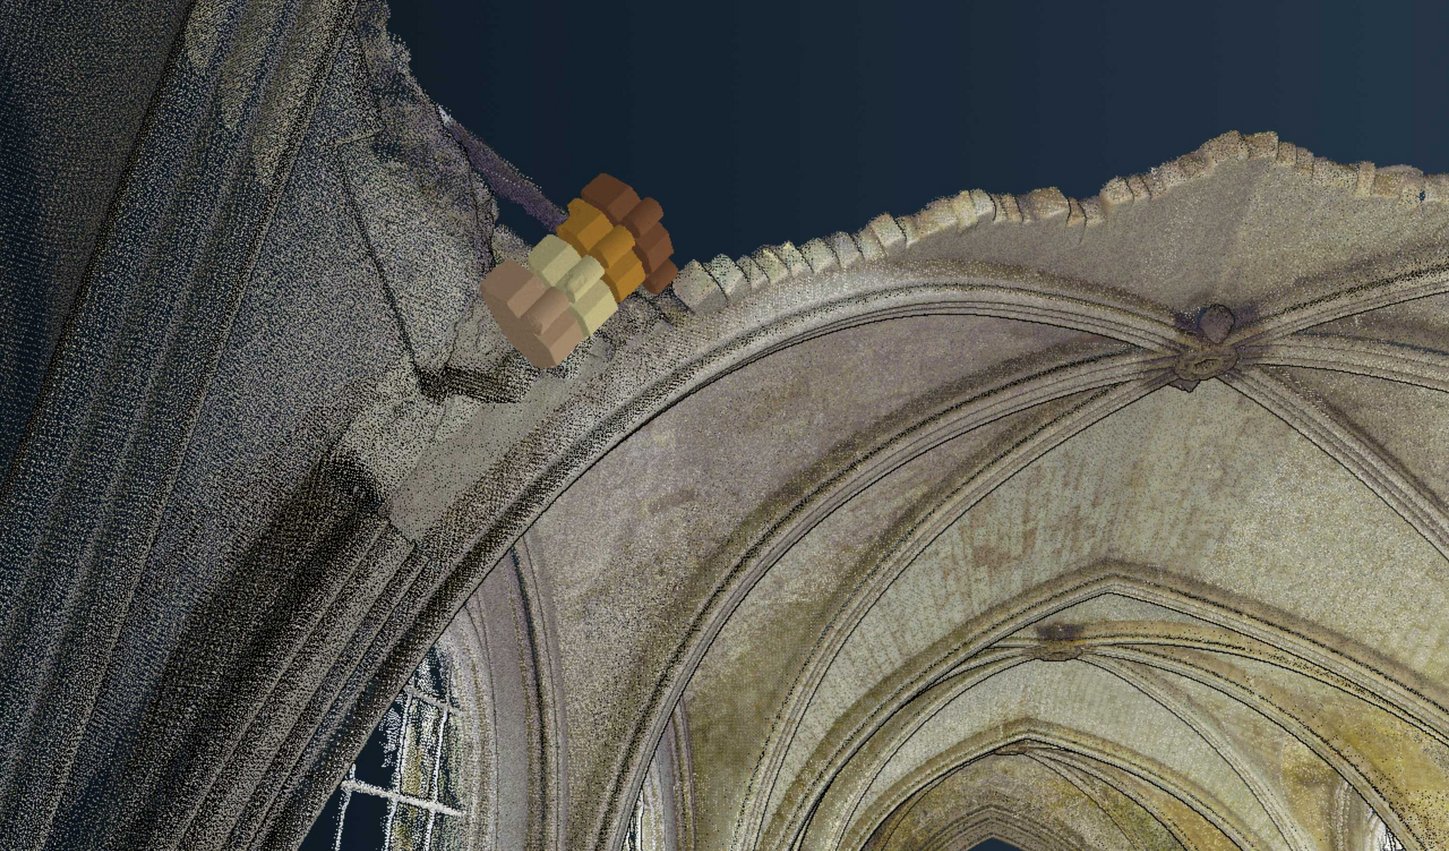 Detail 3-D reconstruction of the vaulted ceiling.